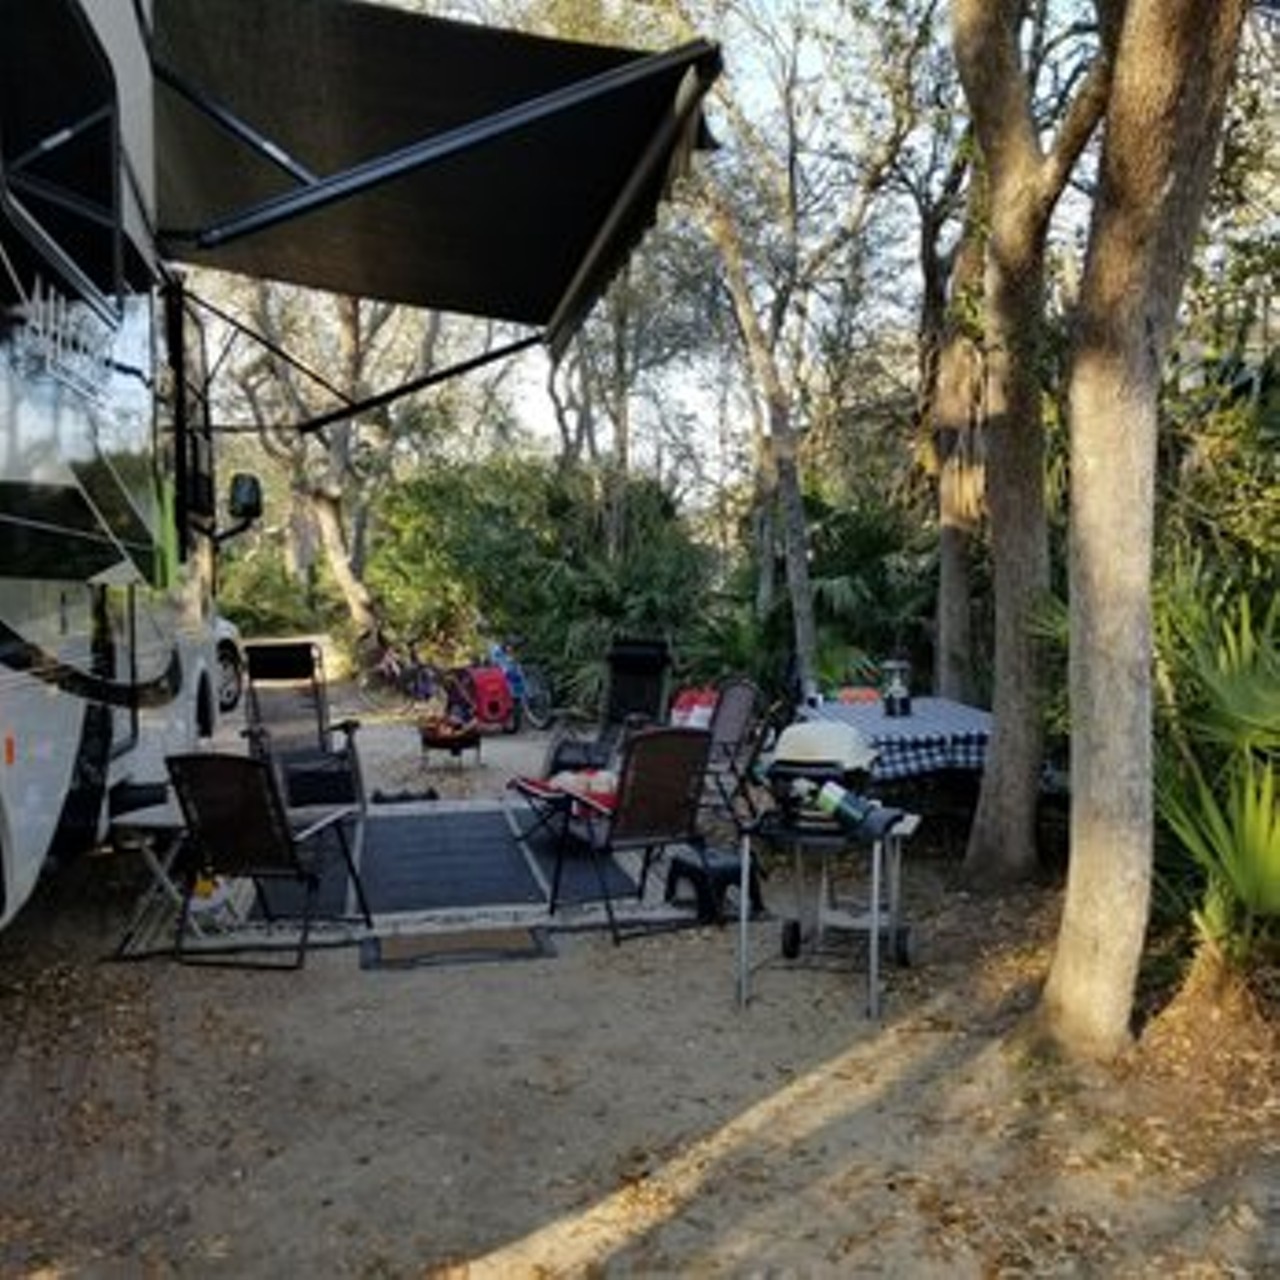 North Beach Camp Resort
4125 Coastal Highway (A1A), St. Augustine
This cozy campground is nestled in between the Atlantic Ocean and the North River, so no matter which way you walk, you’re going to hit a beach. You can camp right on the riverfront or pick a campsite under a cluster of moss-covered oaks and palmettos. And if eating burnt hotdogs and s'mores every night starts to get old, there’s even a full-service restaurant available for campers located right on the oceanfront with a great view of the sunset.